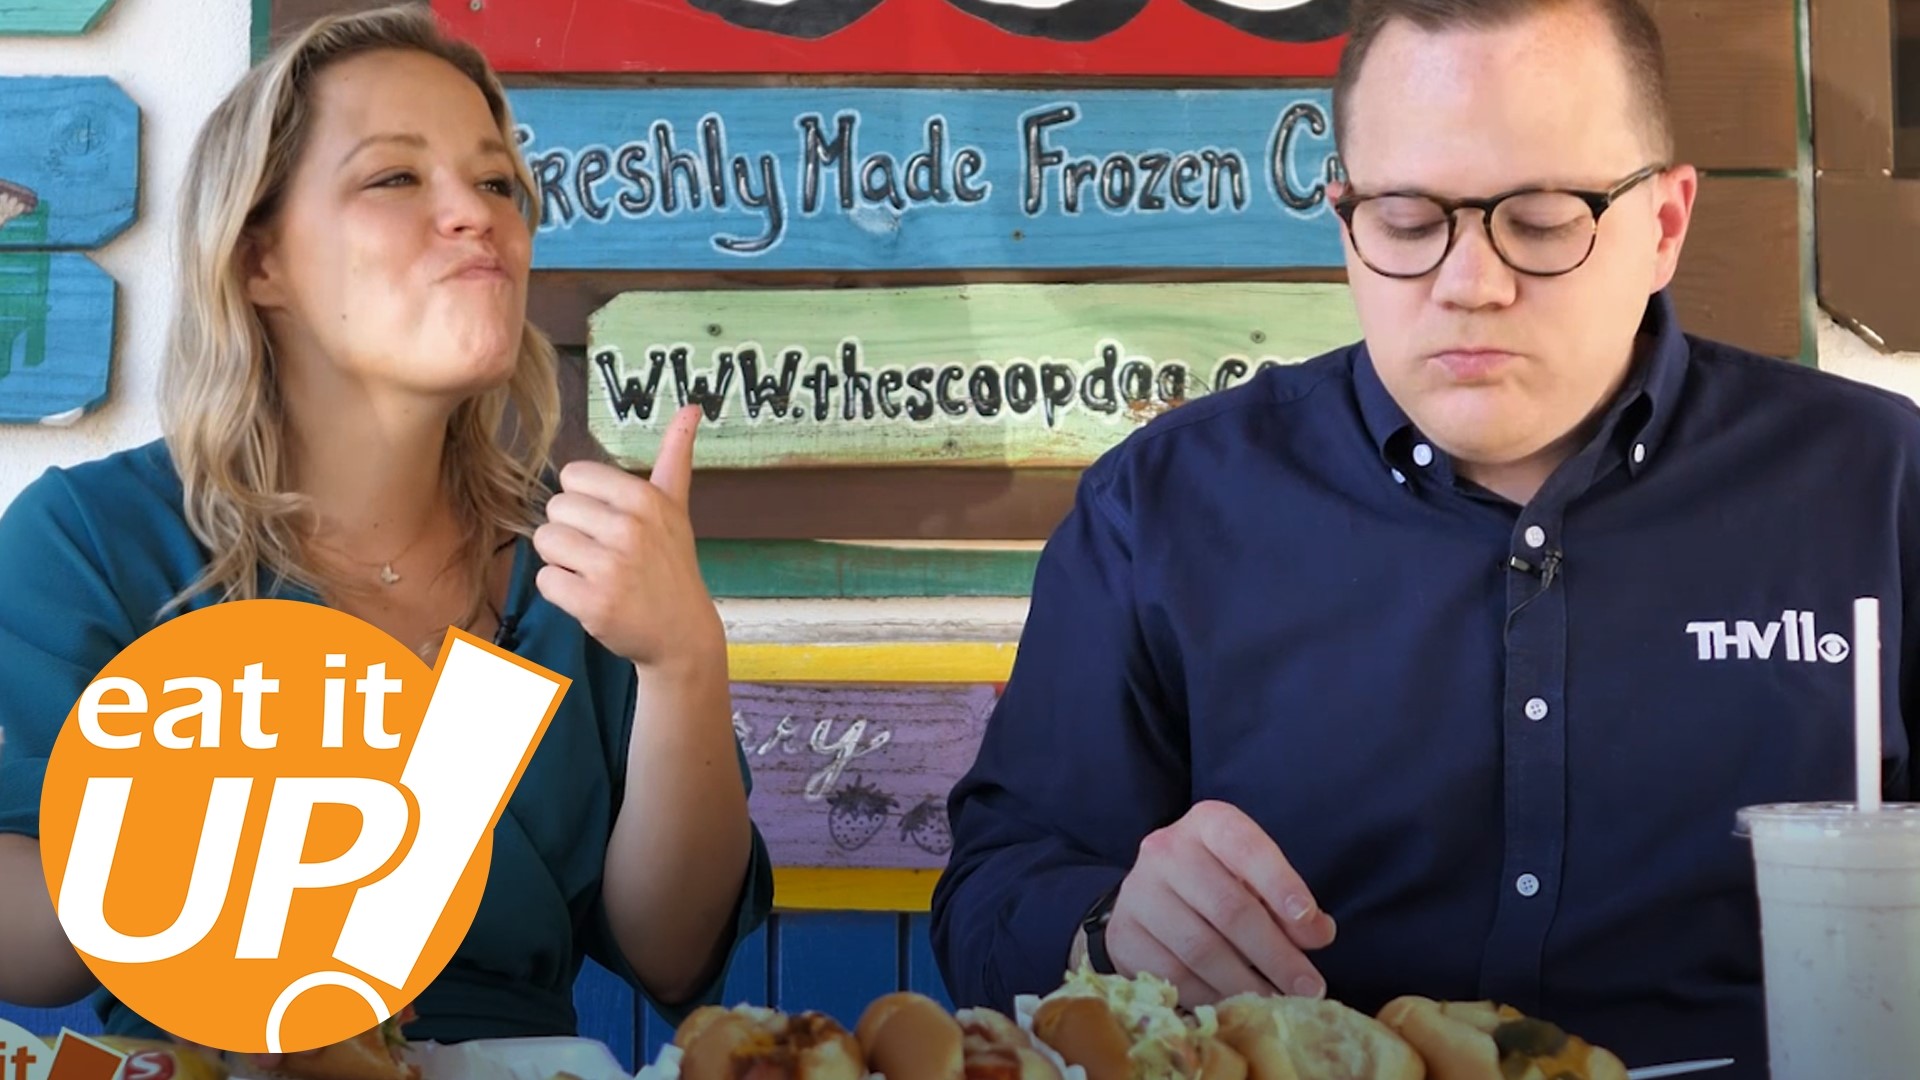 Skot and Sarah went to North Little Rock to try the amazing frozen custard at ScoopDog, a favorite spot for families for 23 years and counting.